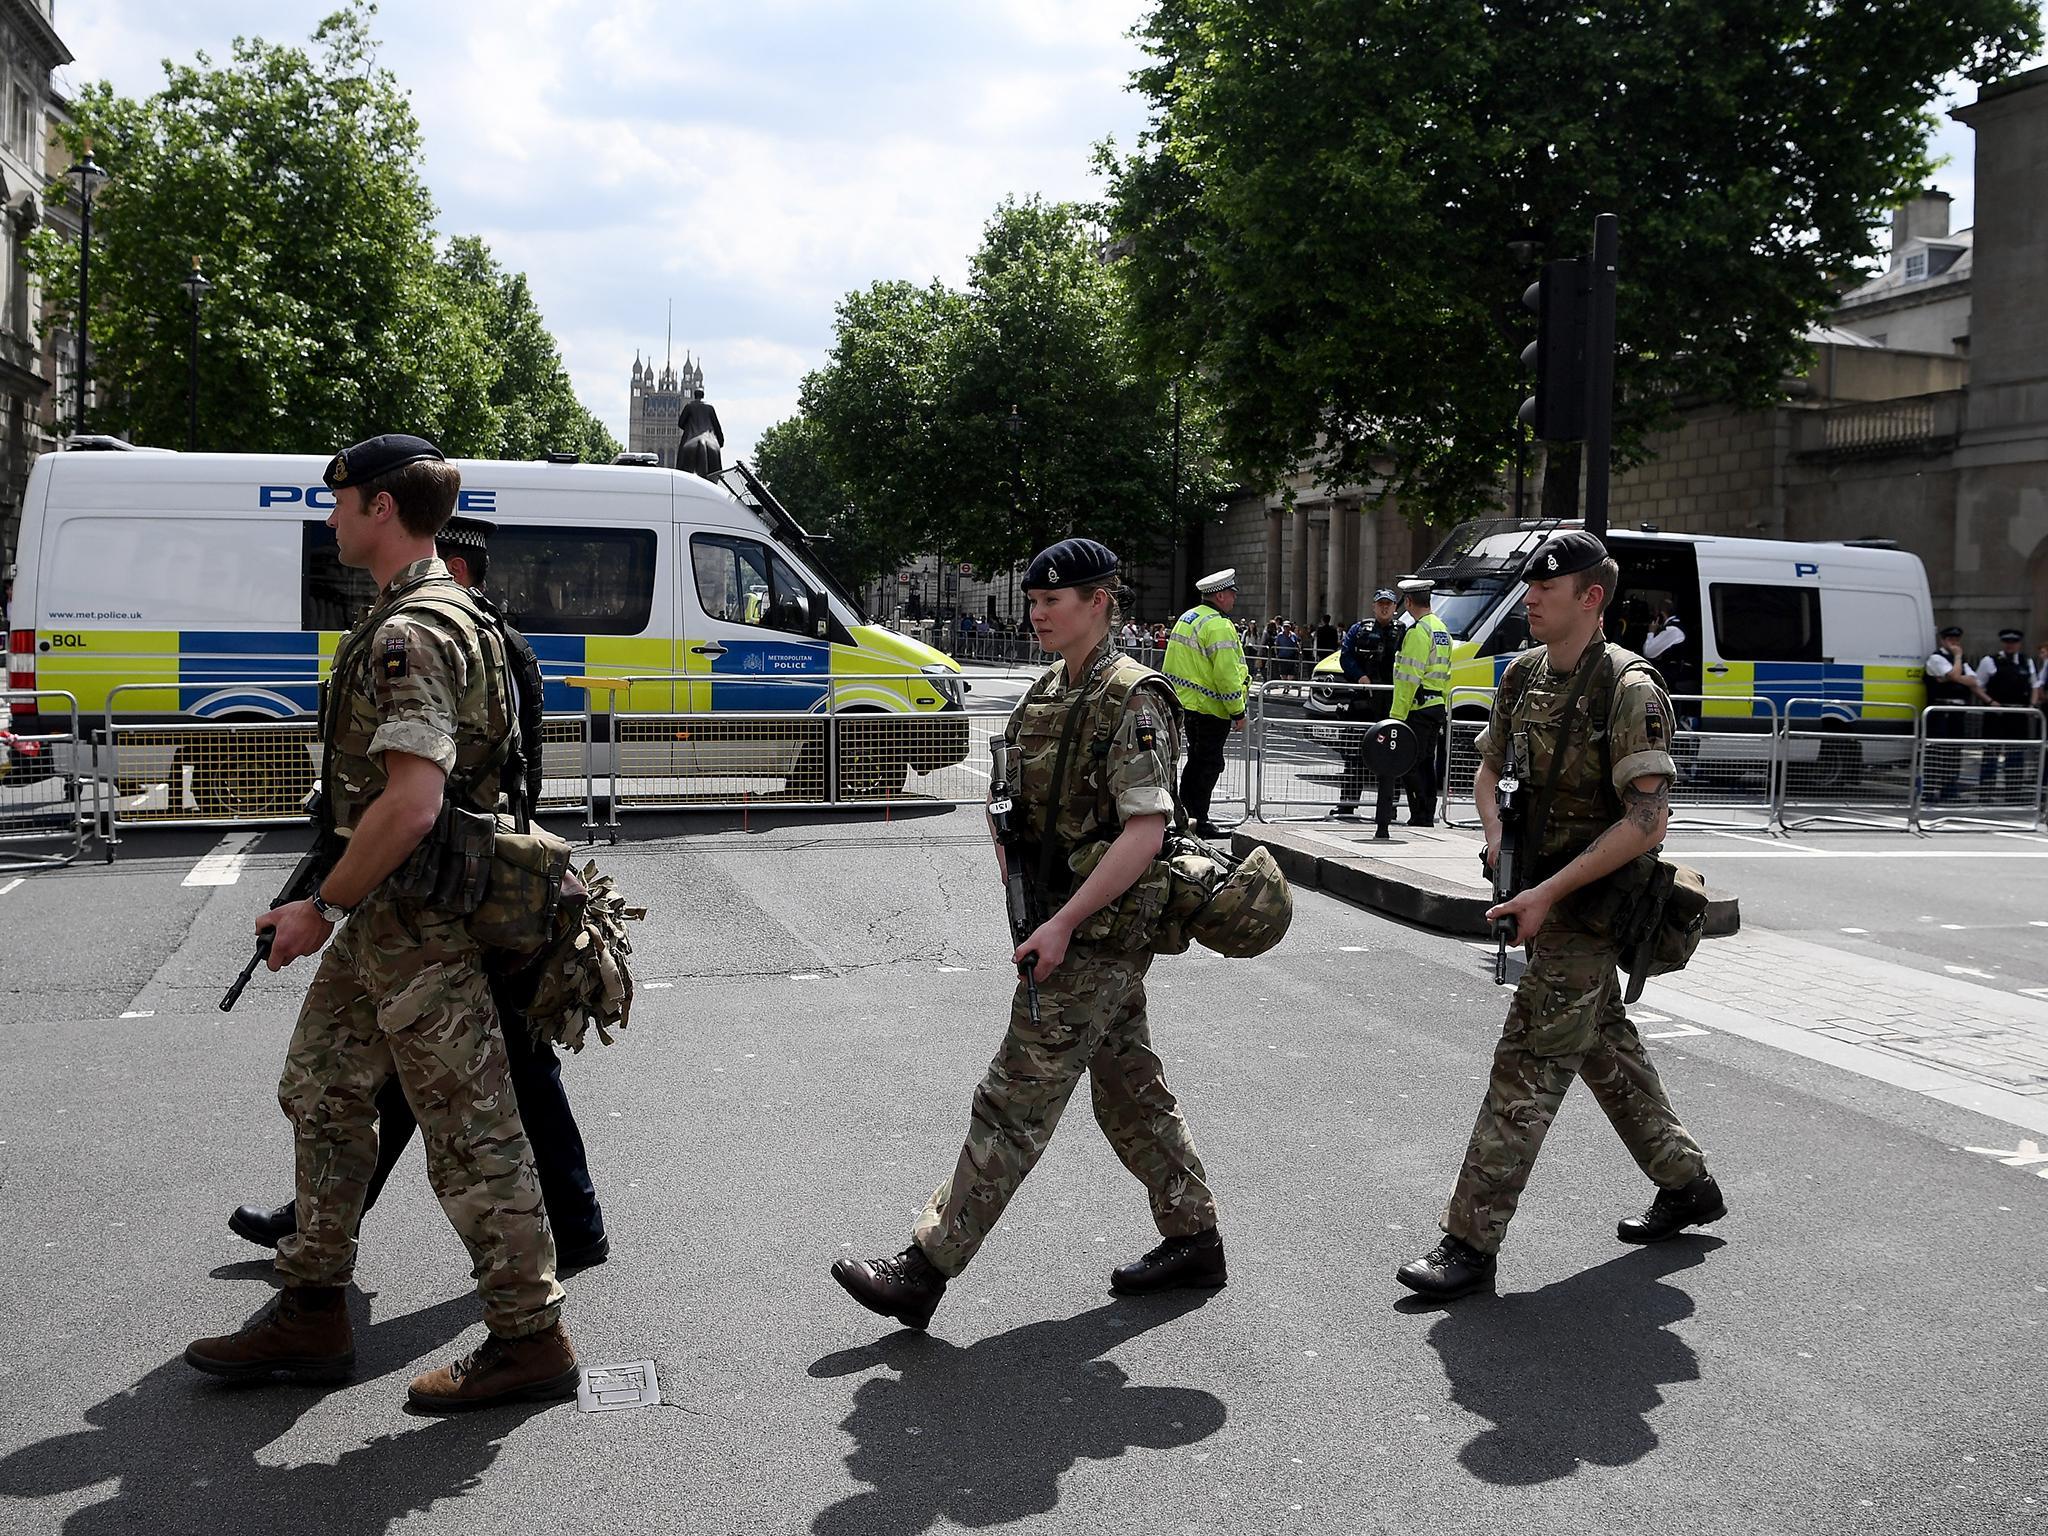 Armed soldiers have been deployed around the country following the Manchester attack